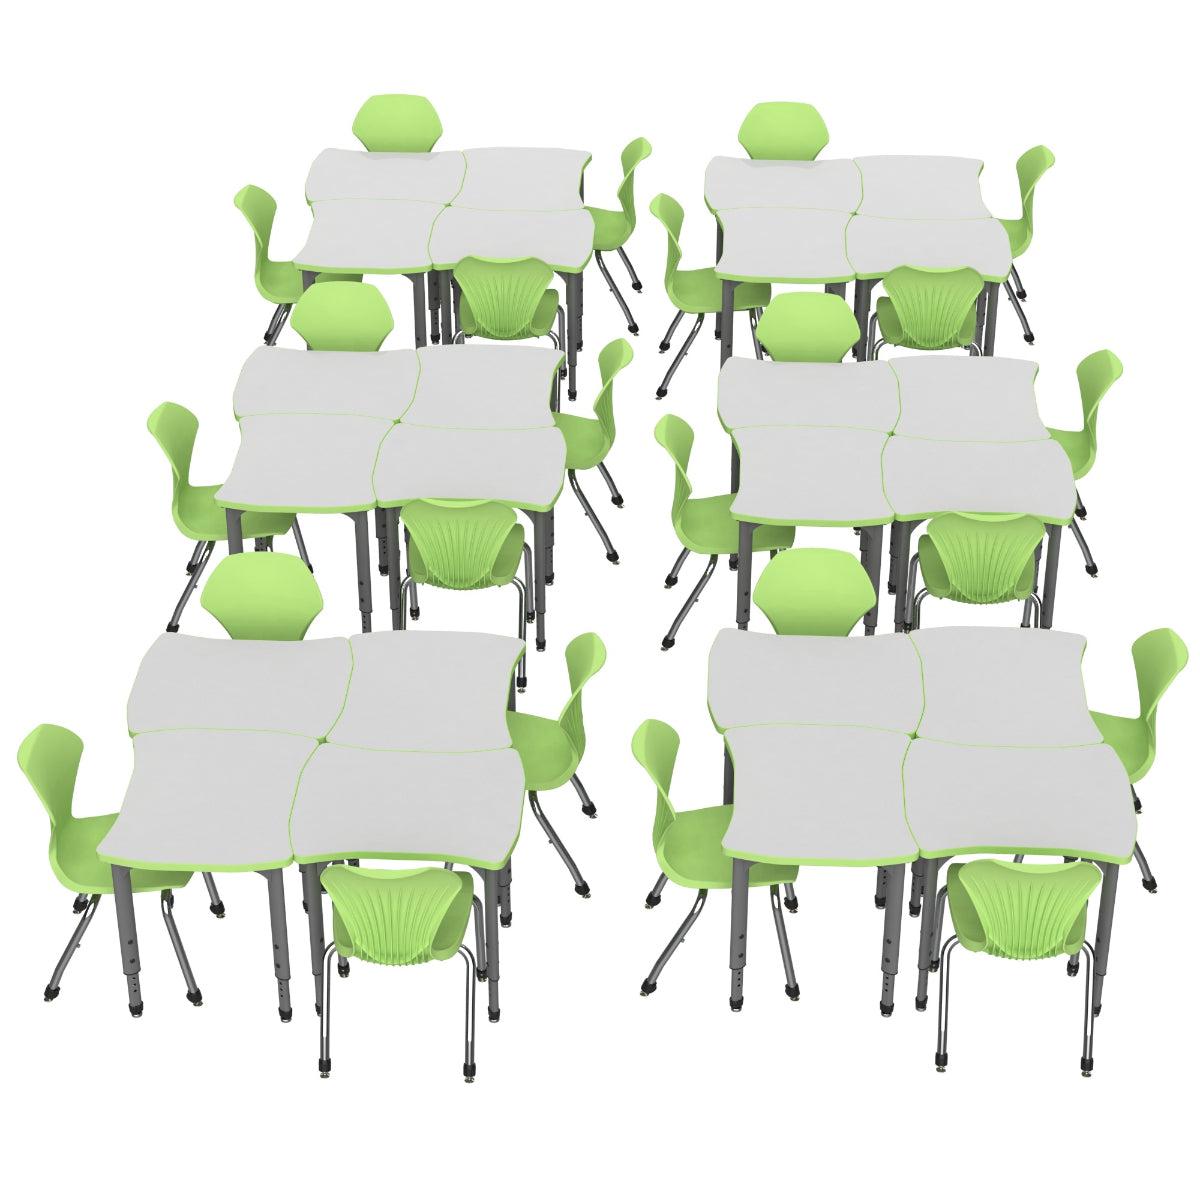 Apex White Dry Erase Classroom Desk and Chair Package, 24 Dog Bone Collaborative Student Desks with 24 Apex Stack Chairs